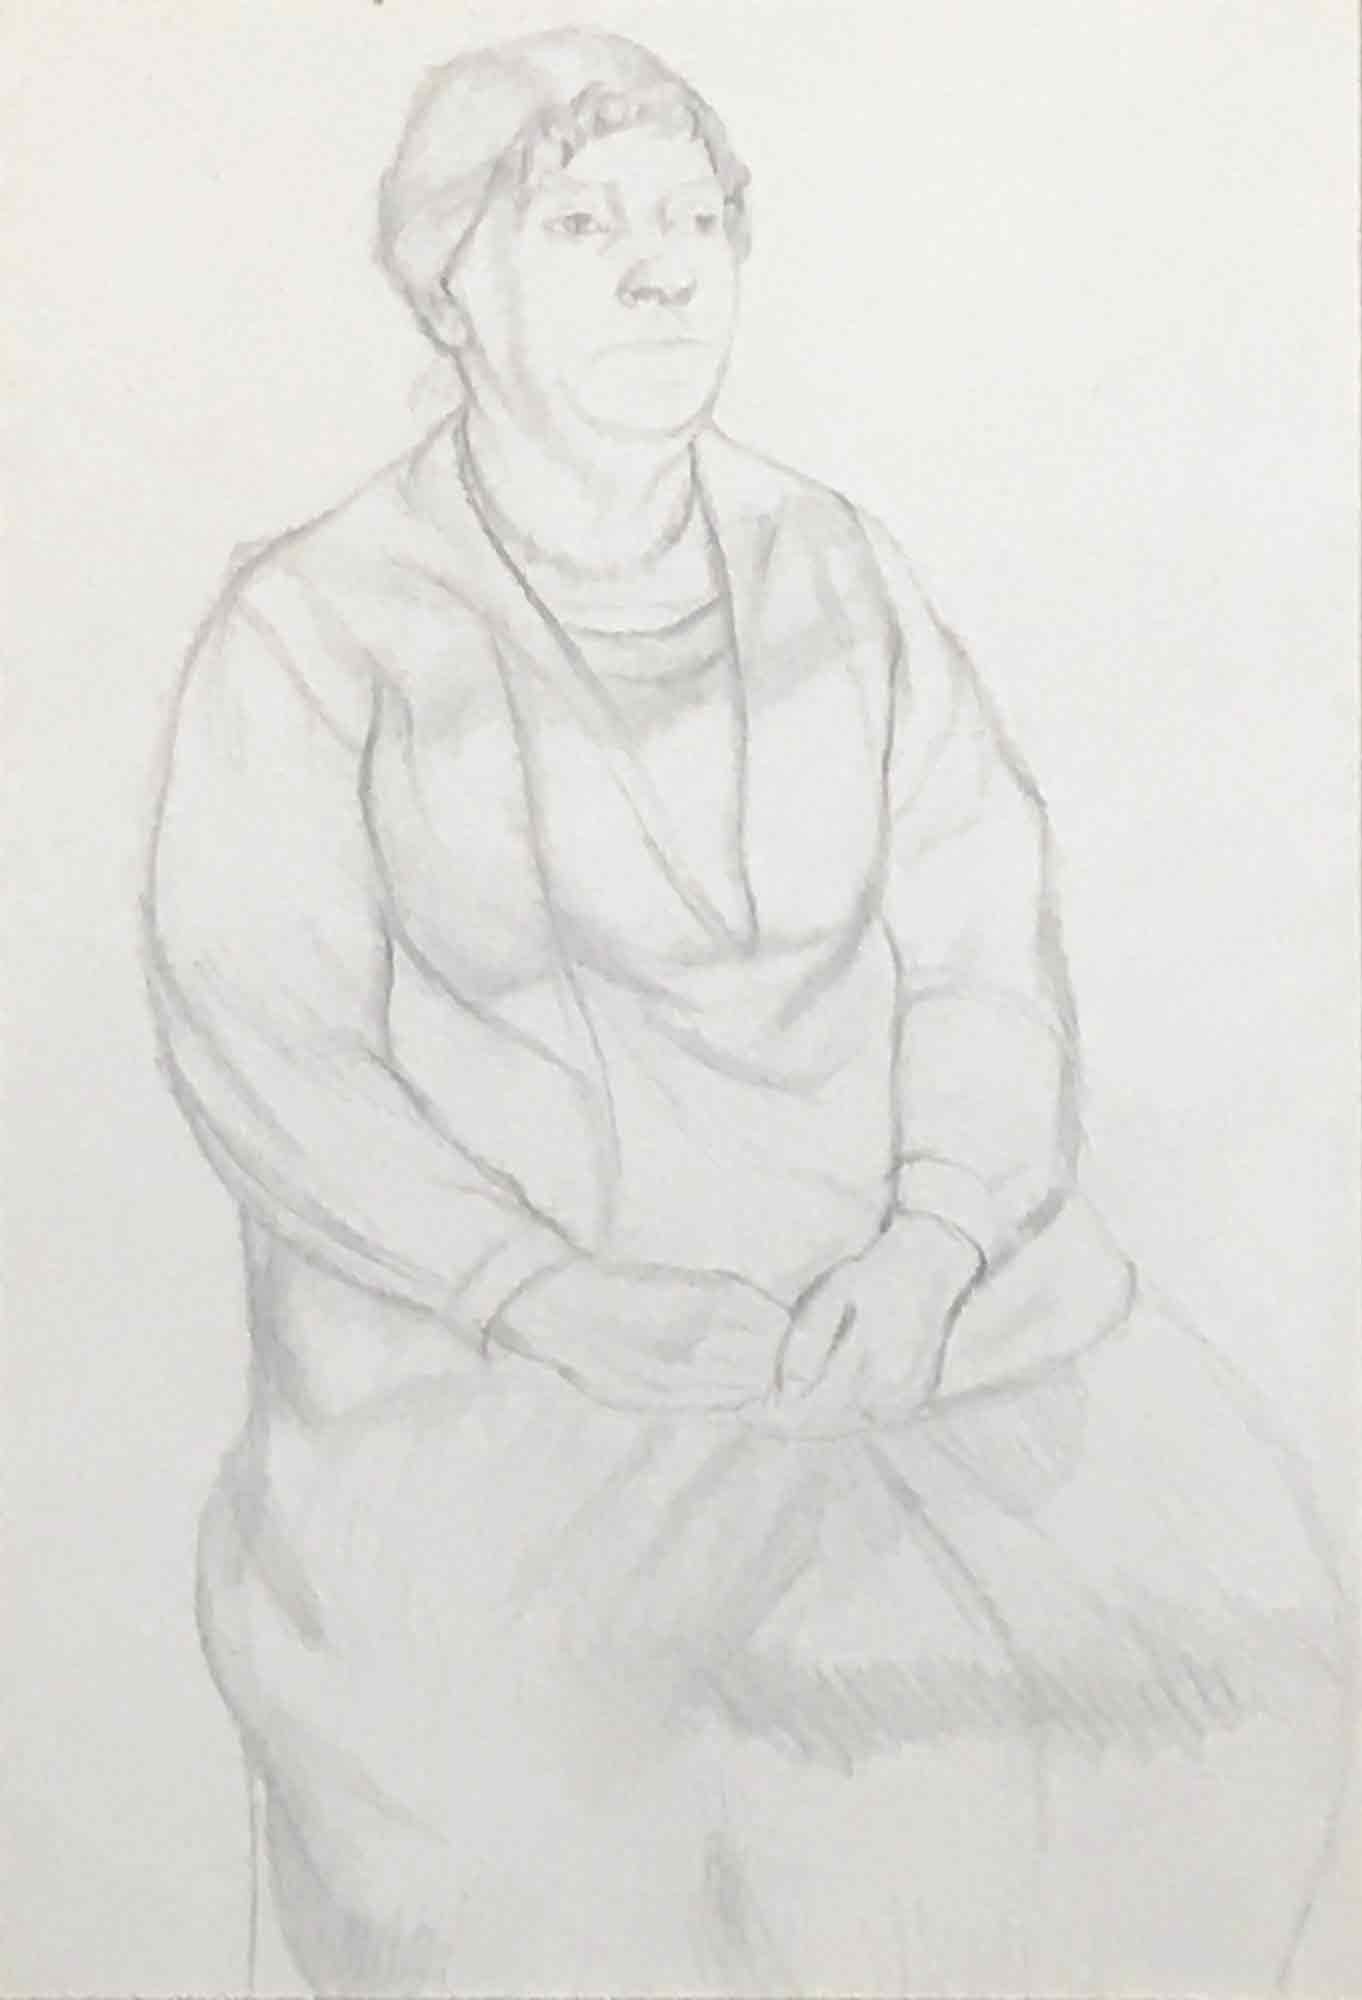 Dorothy Hepworth 'Pencil drawing of an elderly lady'